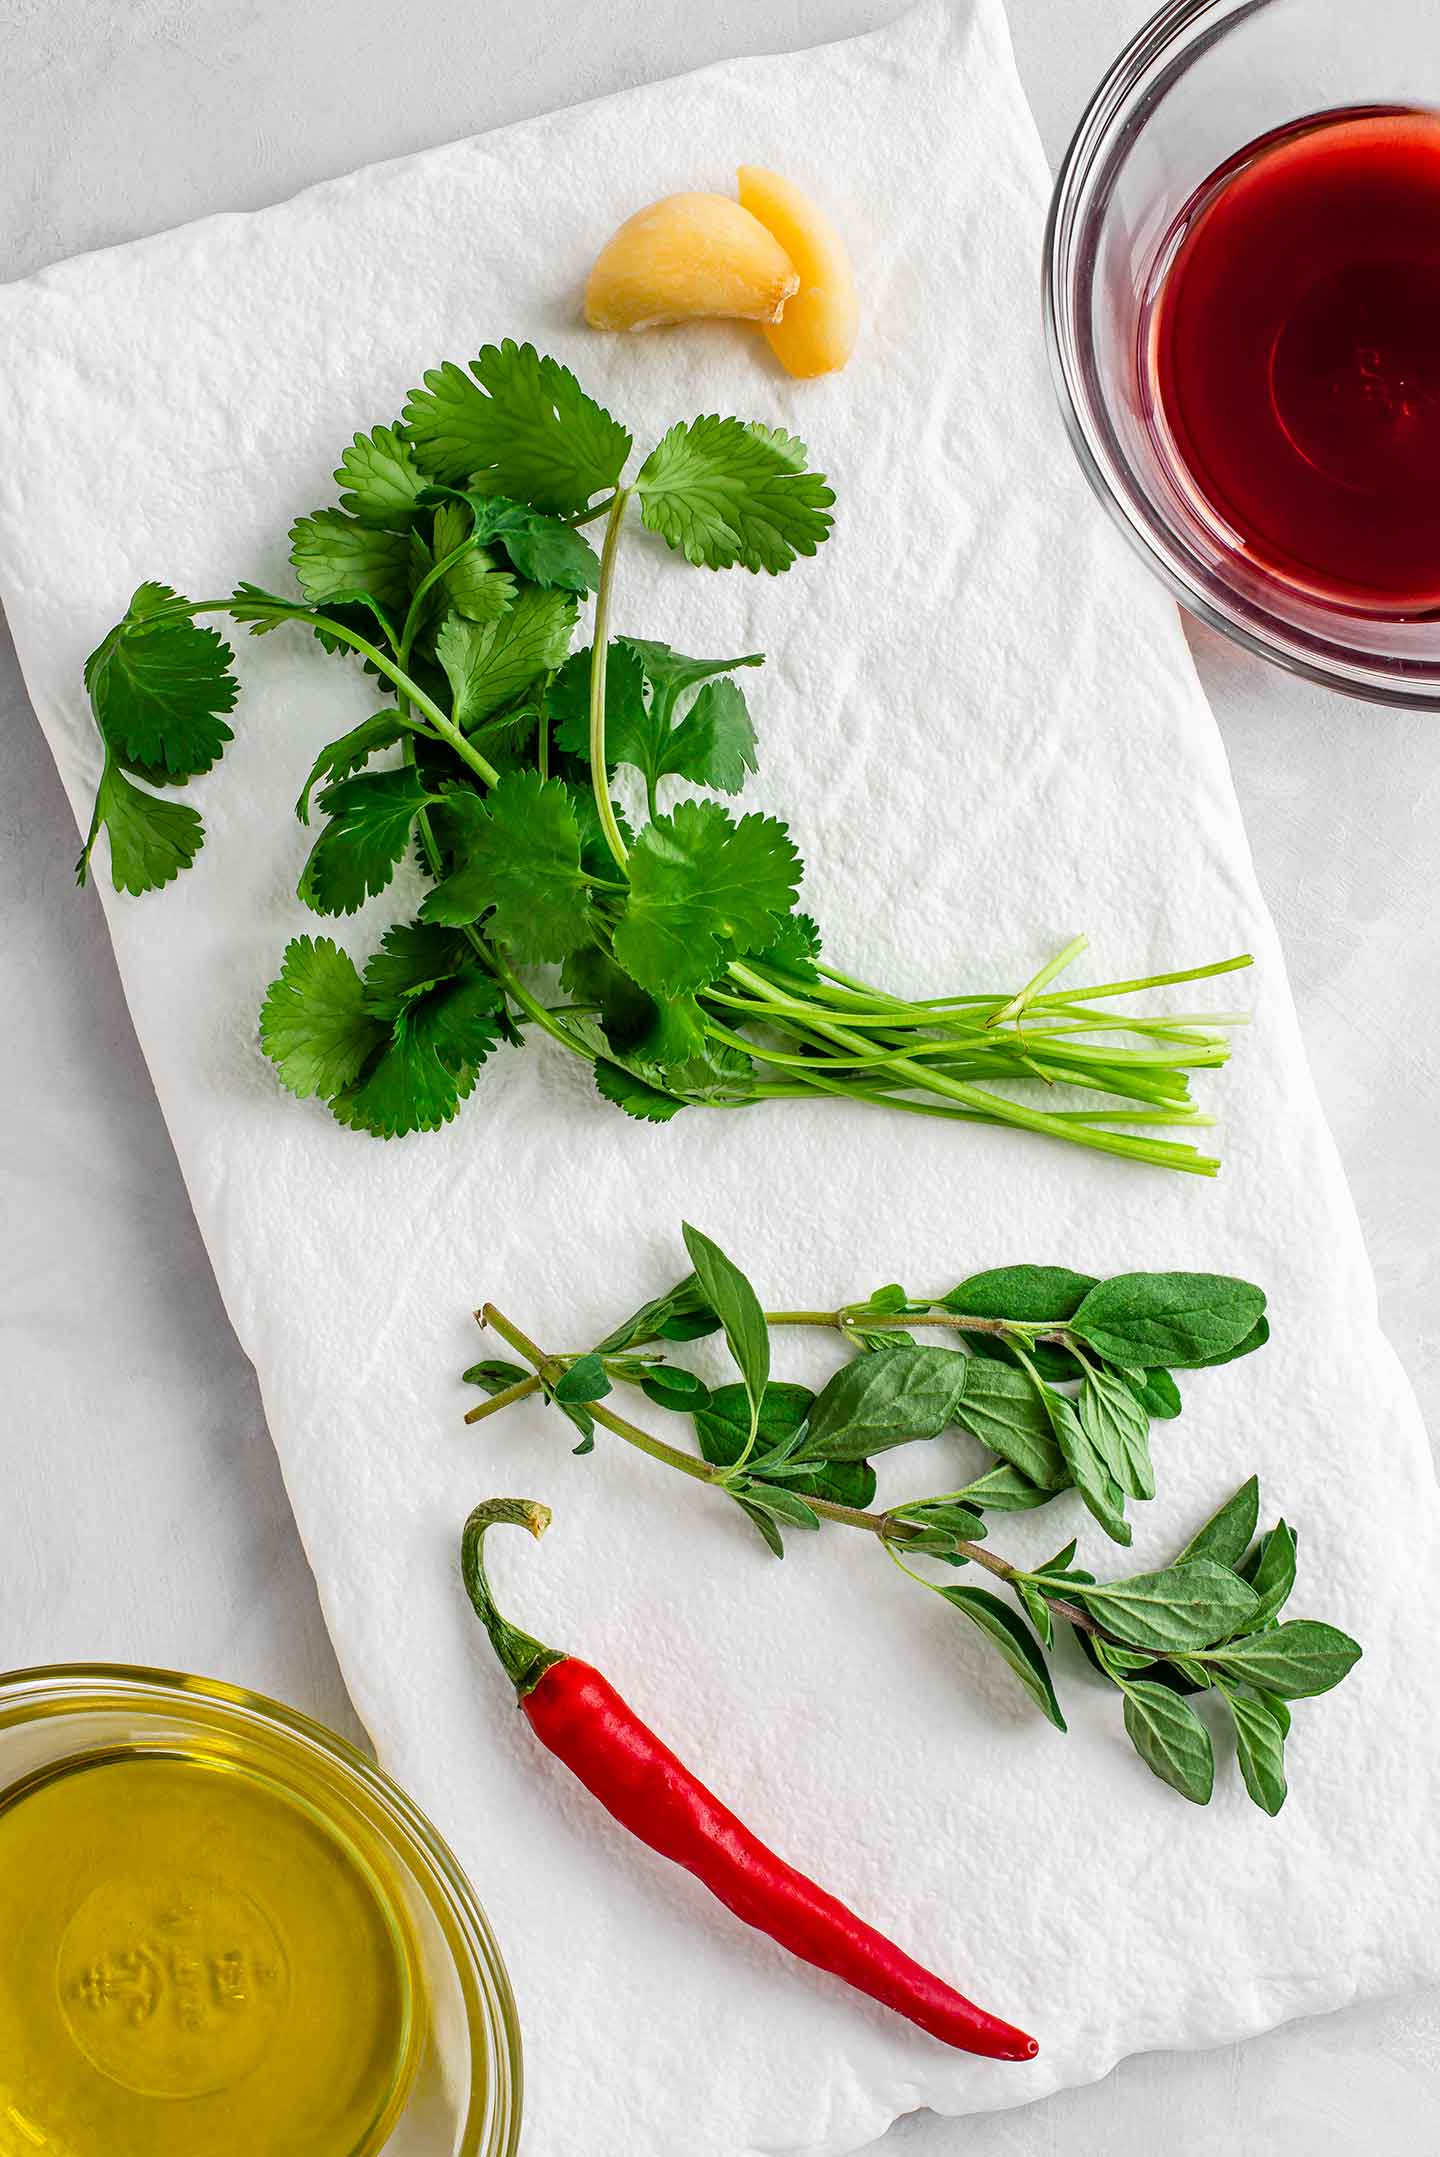 Top down view of fresh cilantro, oregano, garlic, and a chilli pepper on a white tray. Red wine vinegar and olive oil fill small bowls to the side.